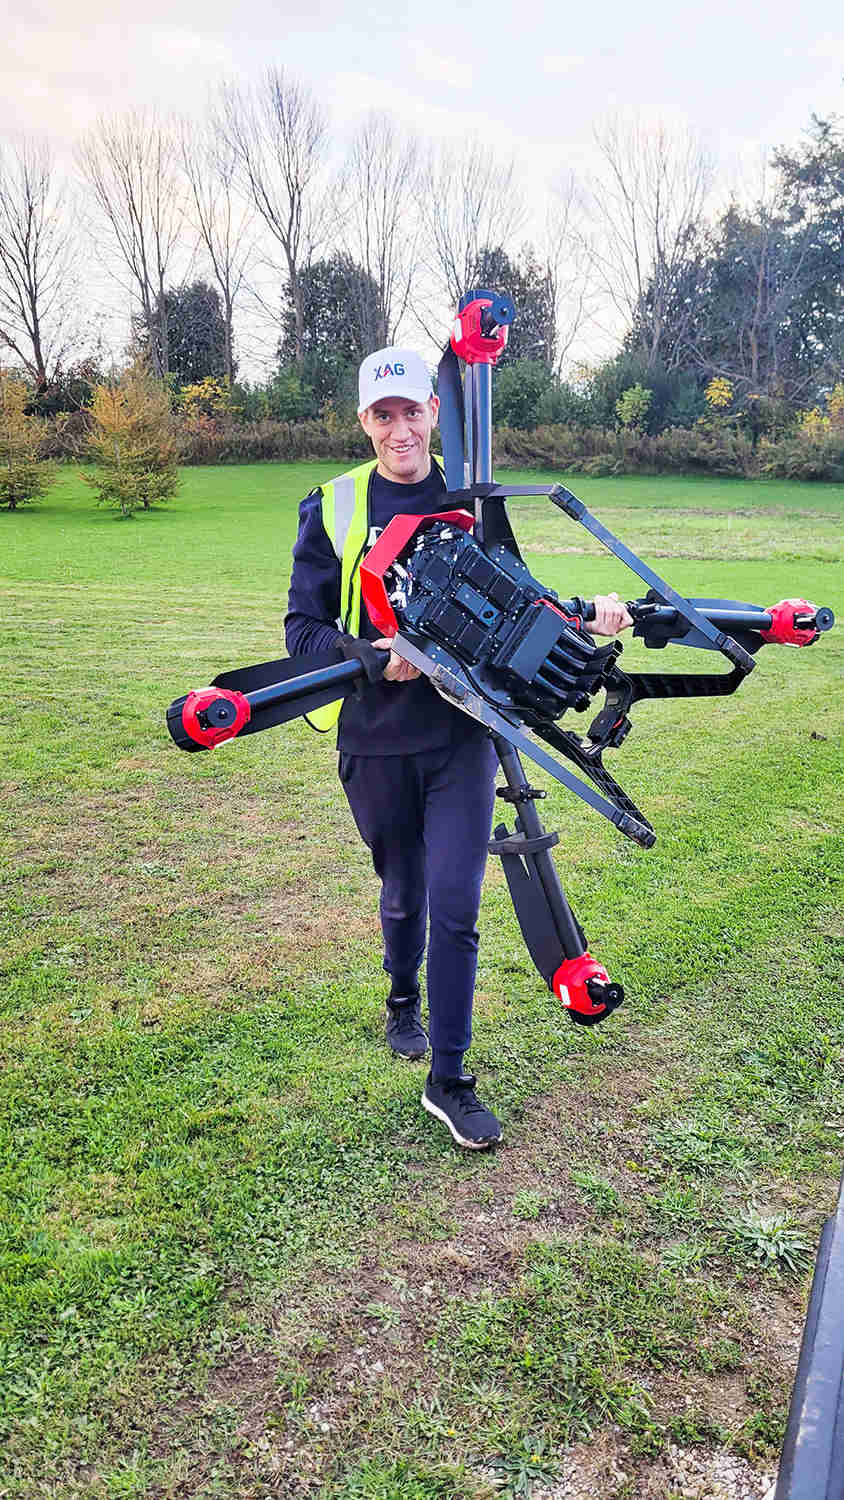 SKY AG Canada team operator carrying the drone to the demonstration site. (source: SKY AG Canada)